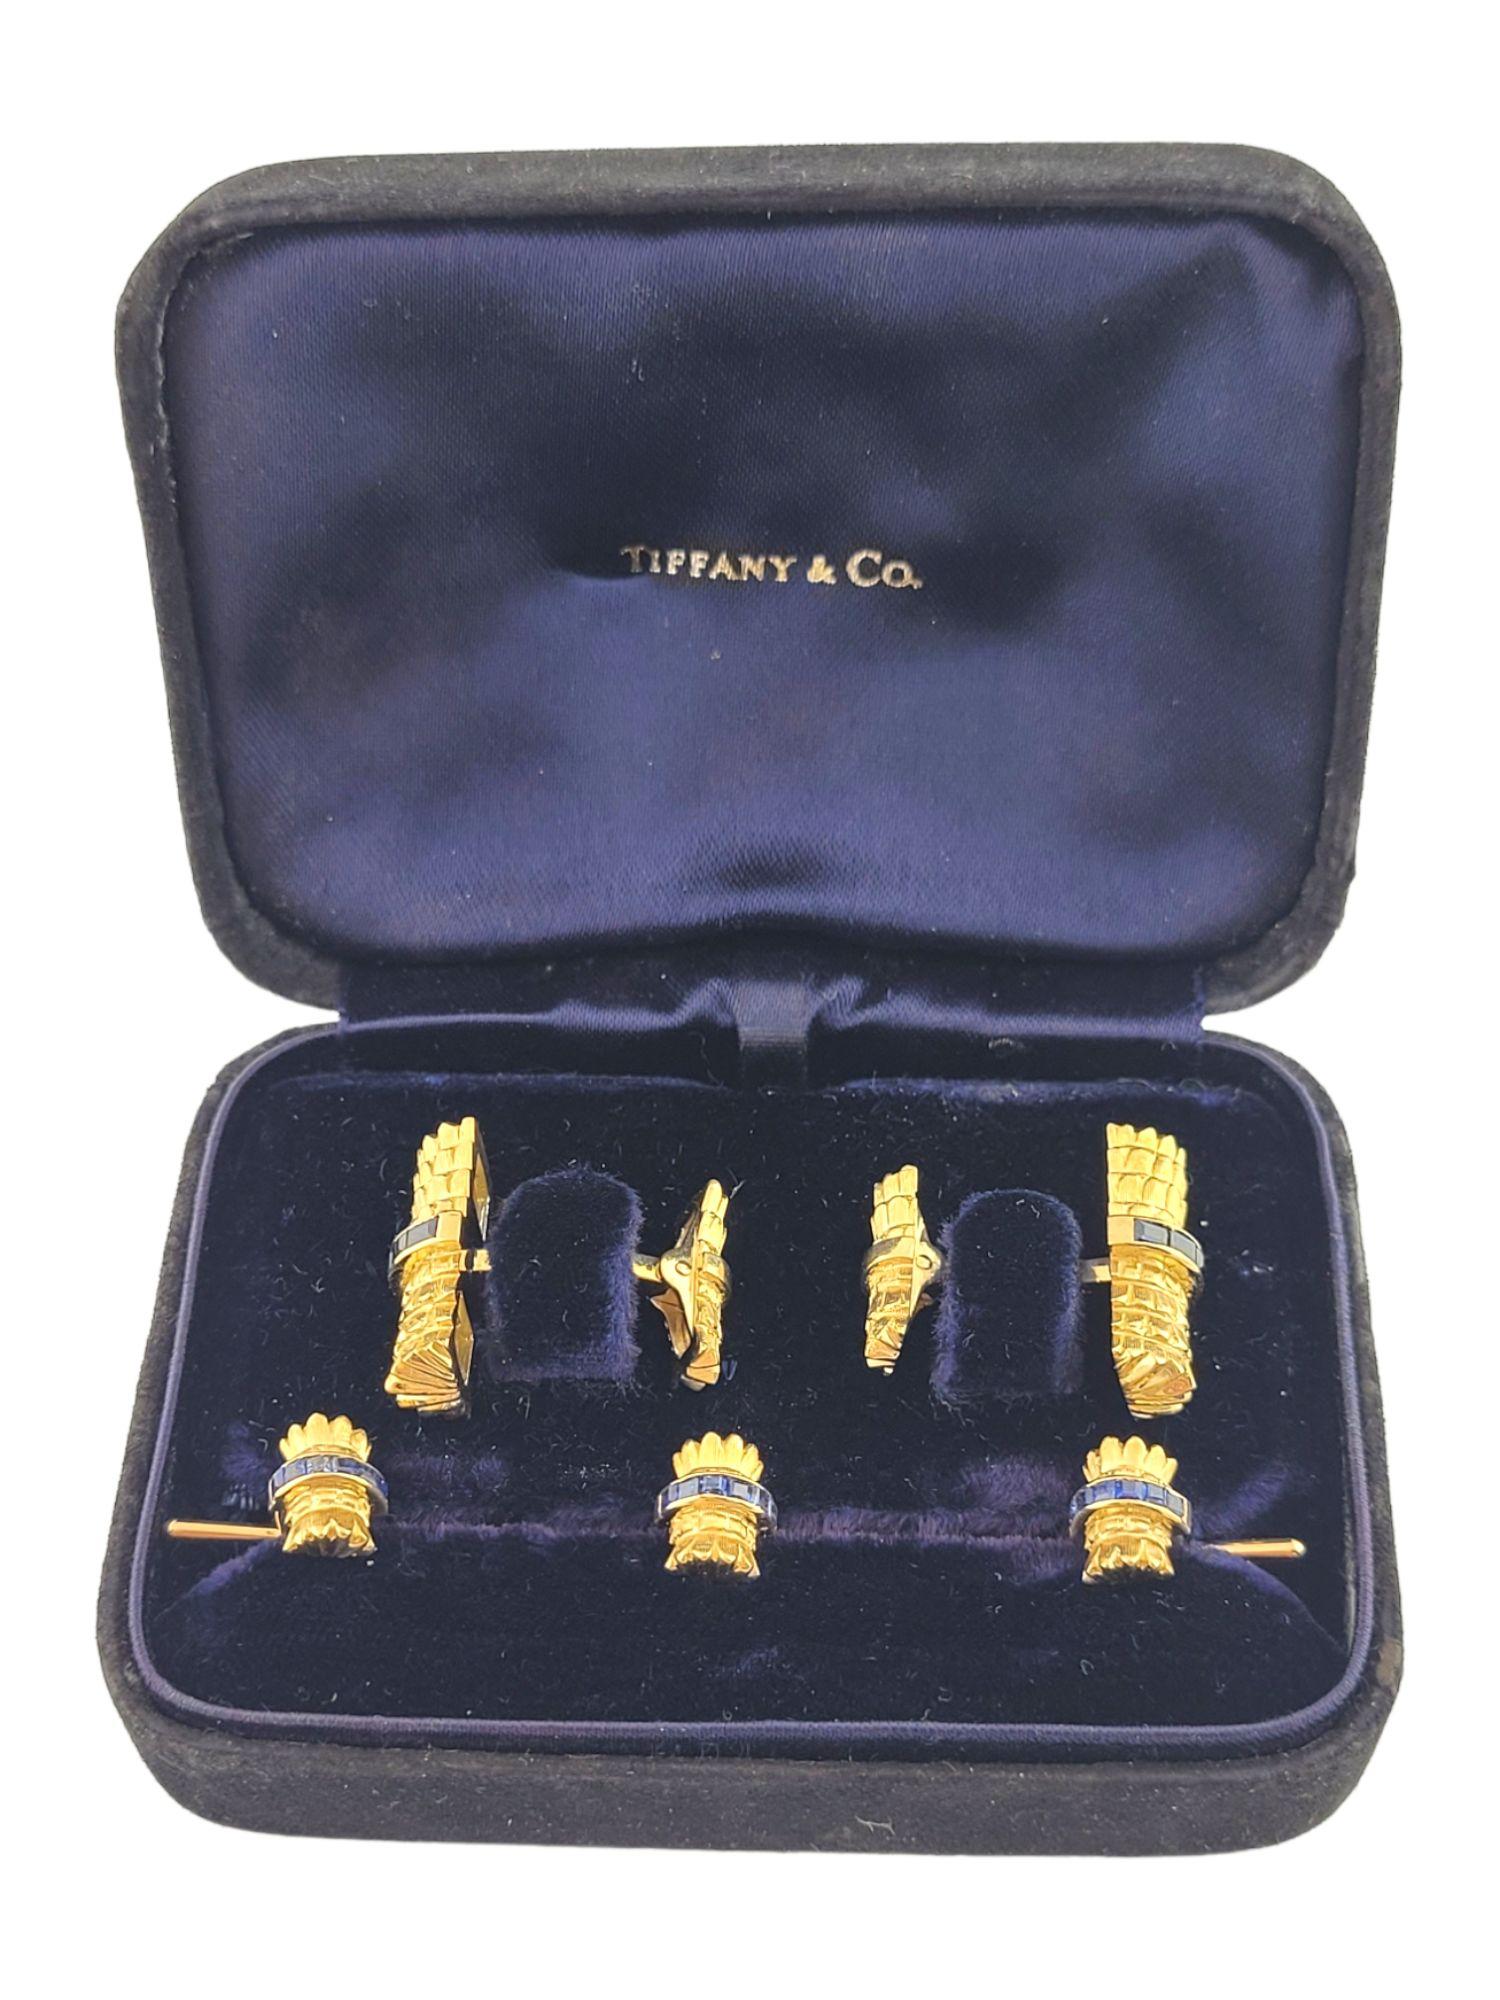 Square Cut Tiffany & Co 18K Yellow Gold & Sapphire Cufflink and Stud Set #14812 For Sale